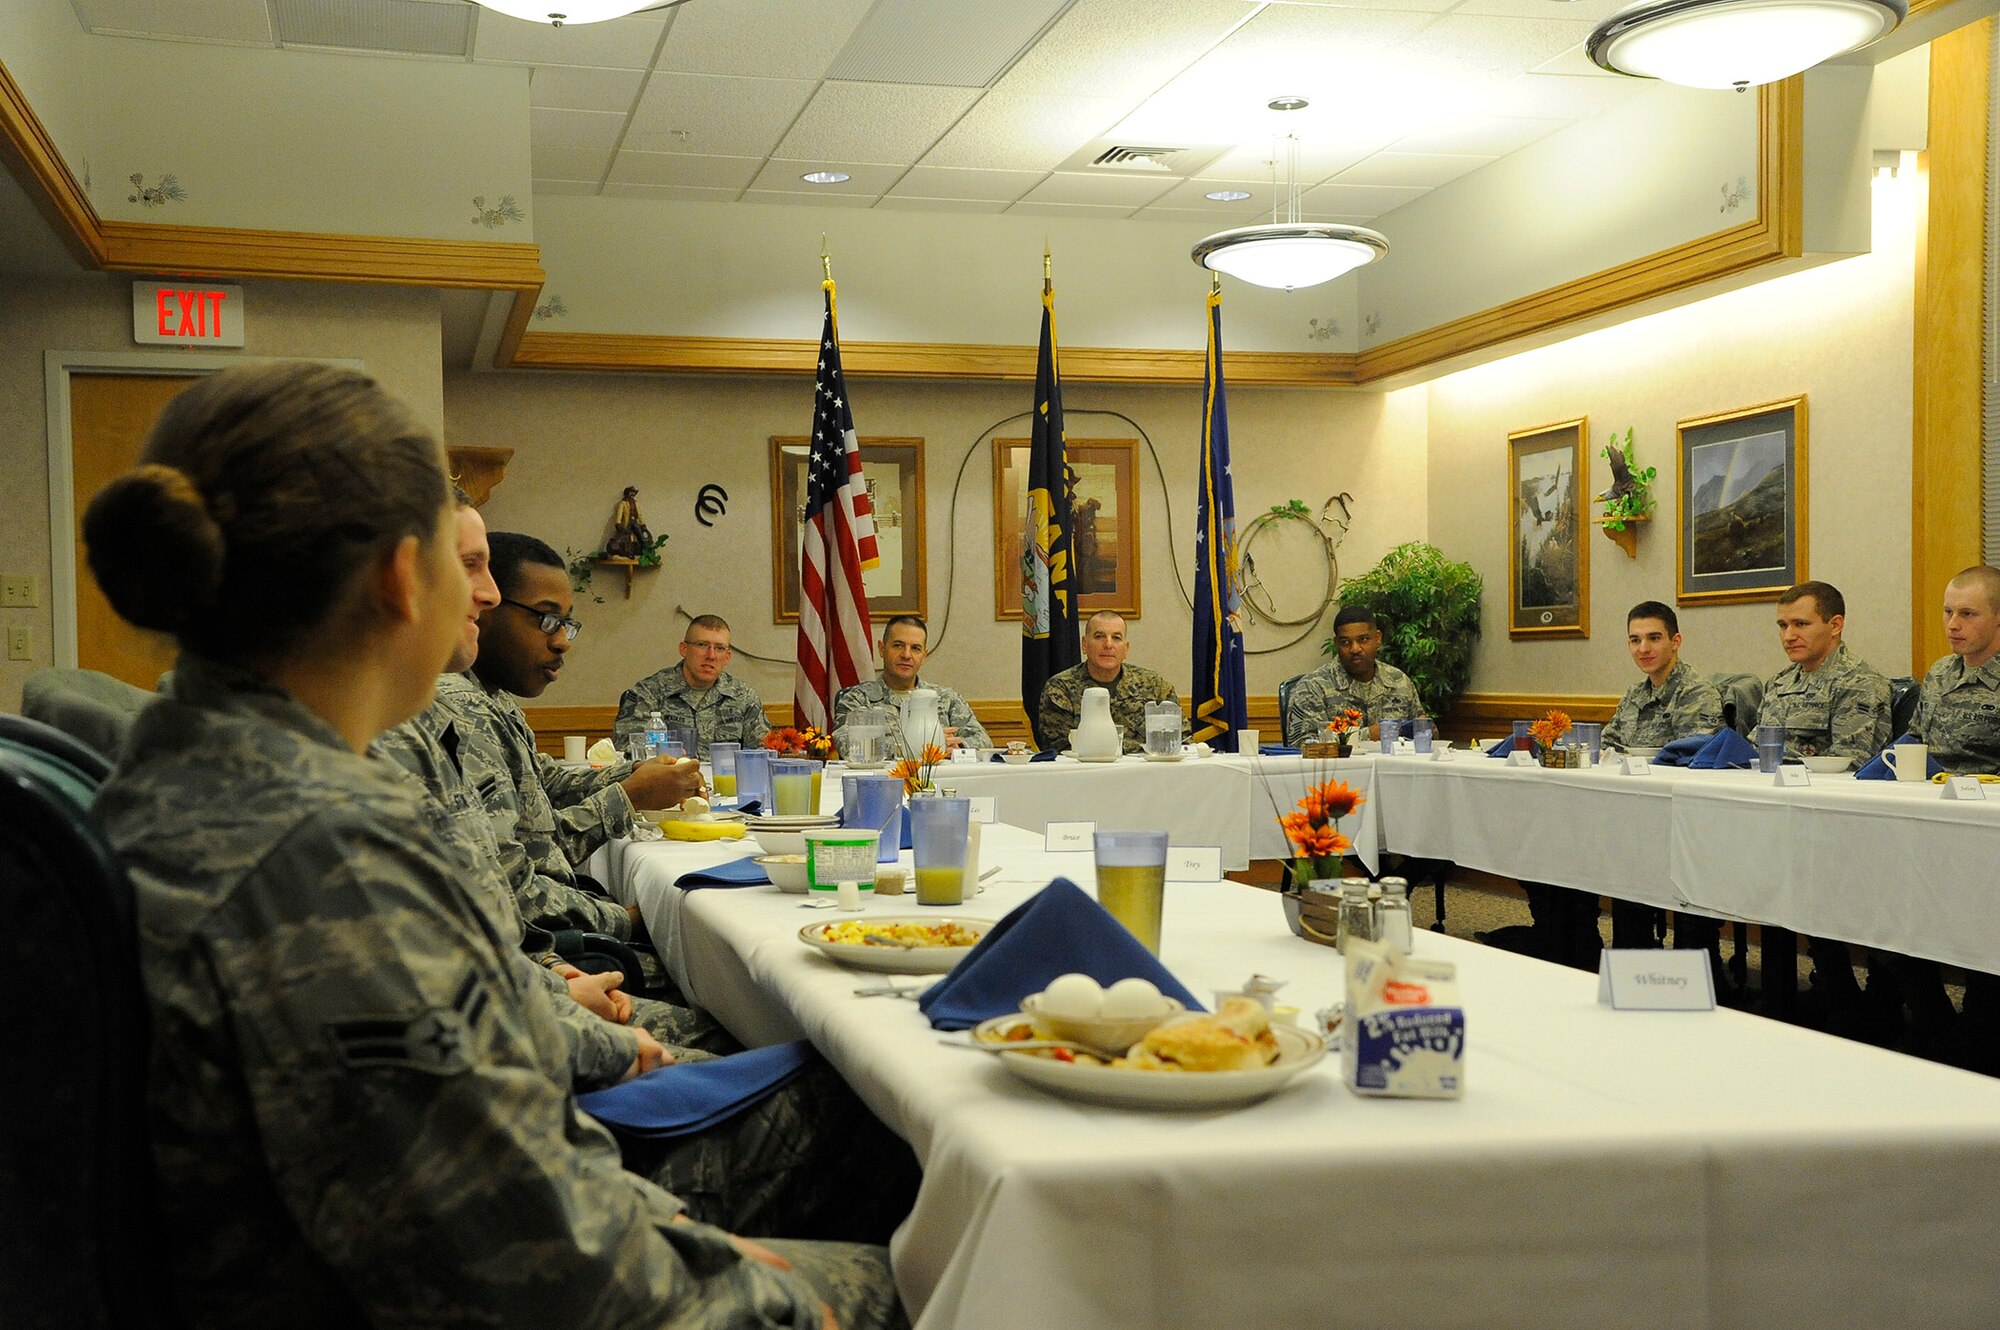 Sgt. Maj. Bryan Battaglia, Senior Enlisted Advisor to the Chairman of the Joint Chiefs of Staff, speaks with Airmen during breakfast at Malmstrom’s Elkhorn Dining Facility on Jan. 16. During the breakfast, Battaglia addressed questions Airmen had pertaining to recent changes within the Air Force structure and explained what is being done to make force shaping as smooth as possible. (U.S. Air Force photo/Airman 1st Class Collin Schmidt)
